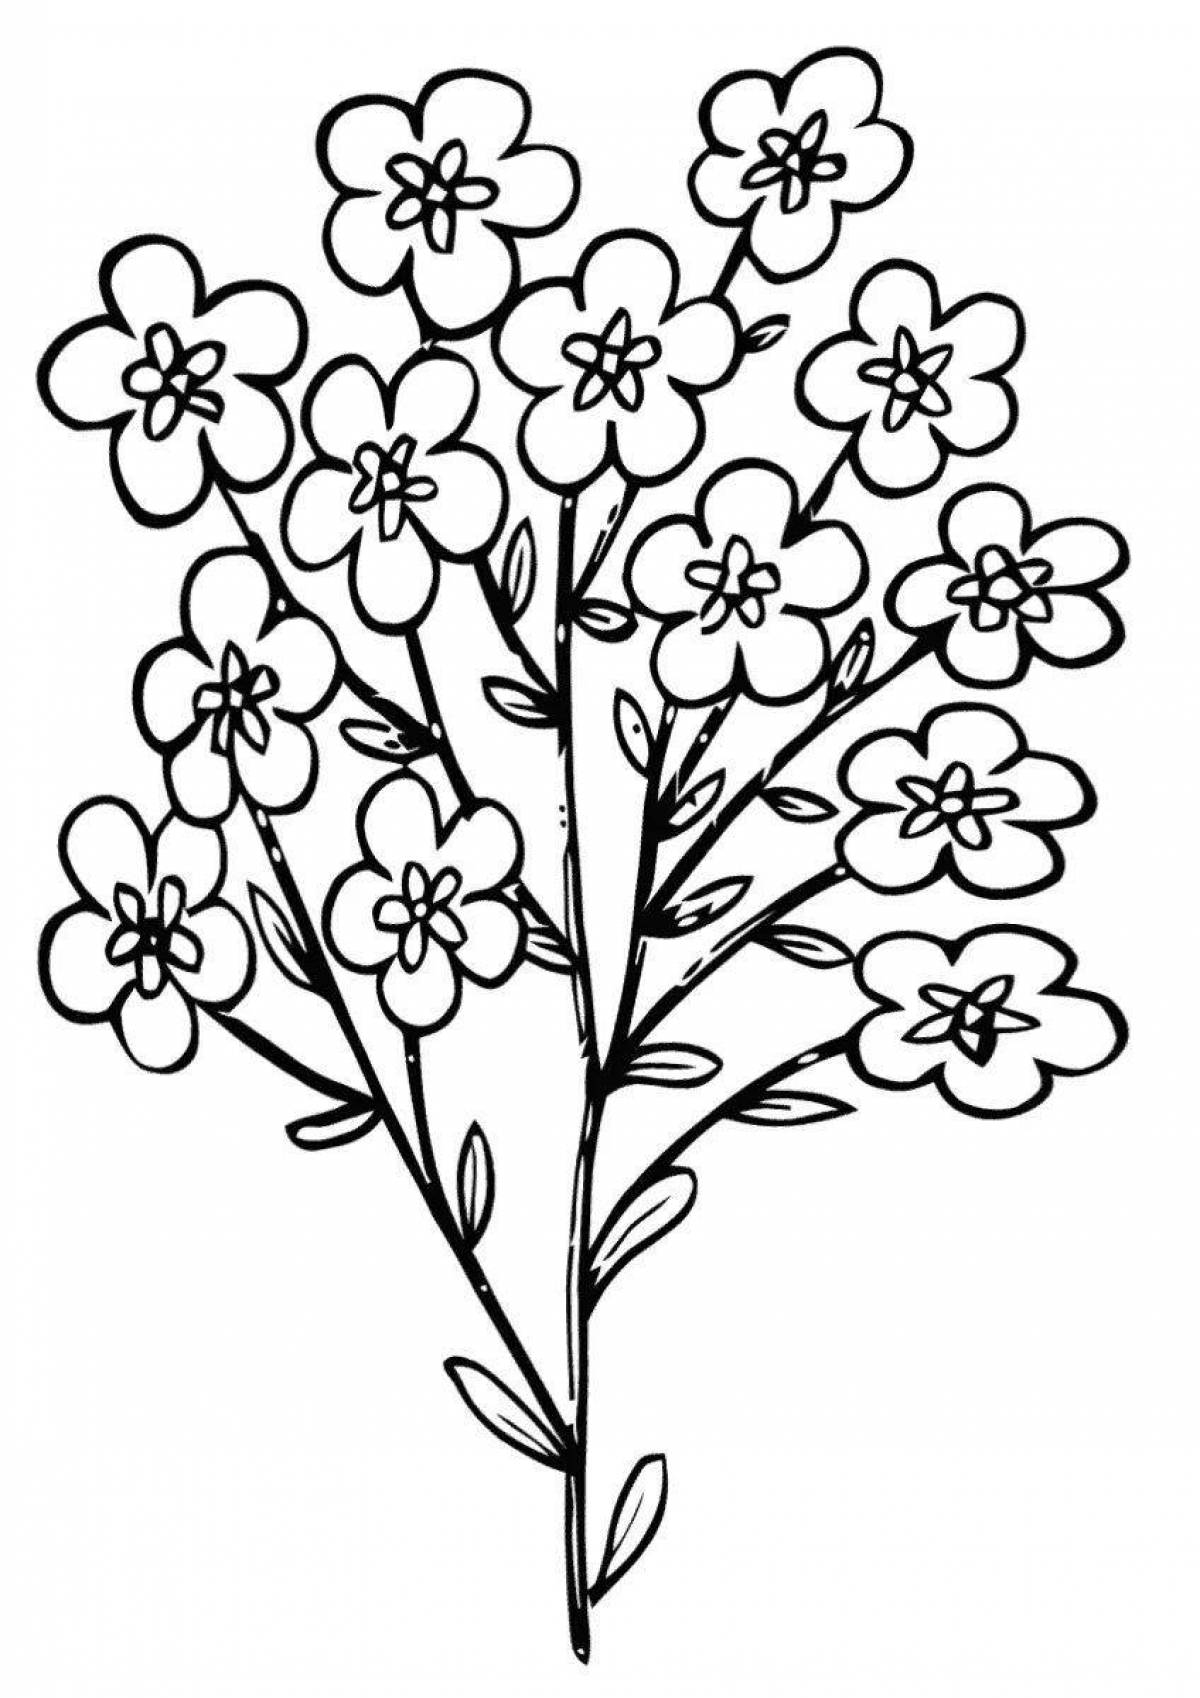 Coloring page elegant forget-me-not flower